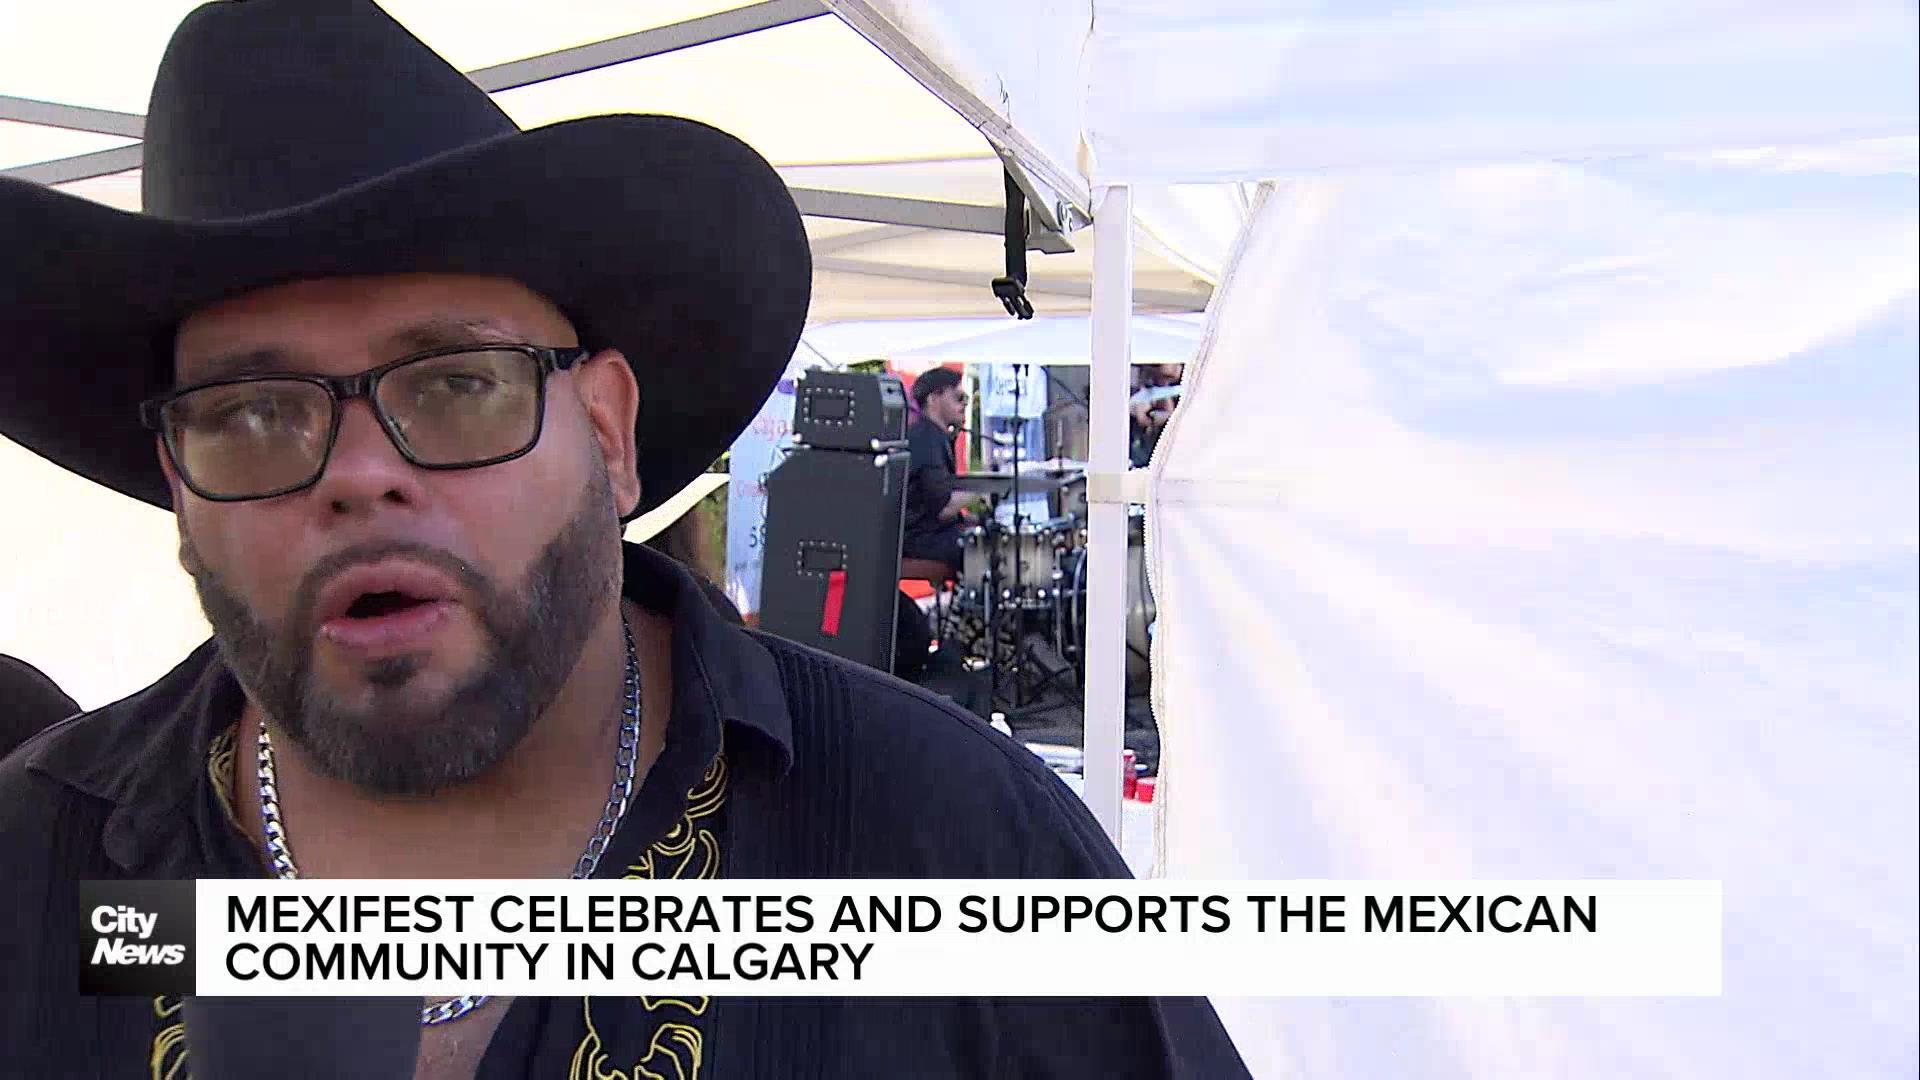 Mexifest celebrates the Mexican community in Calgary